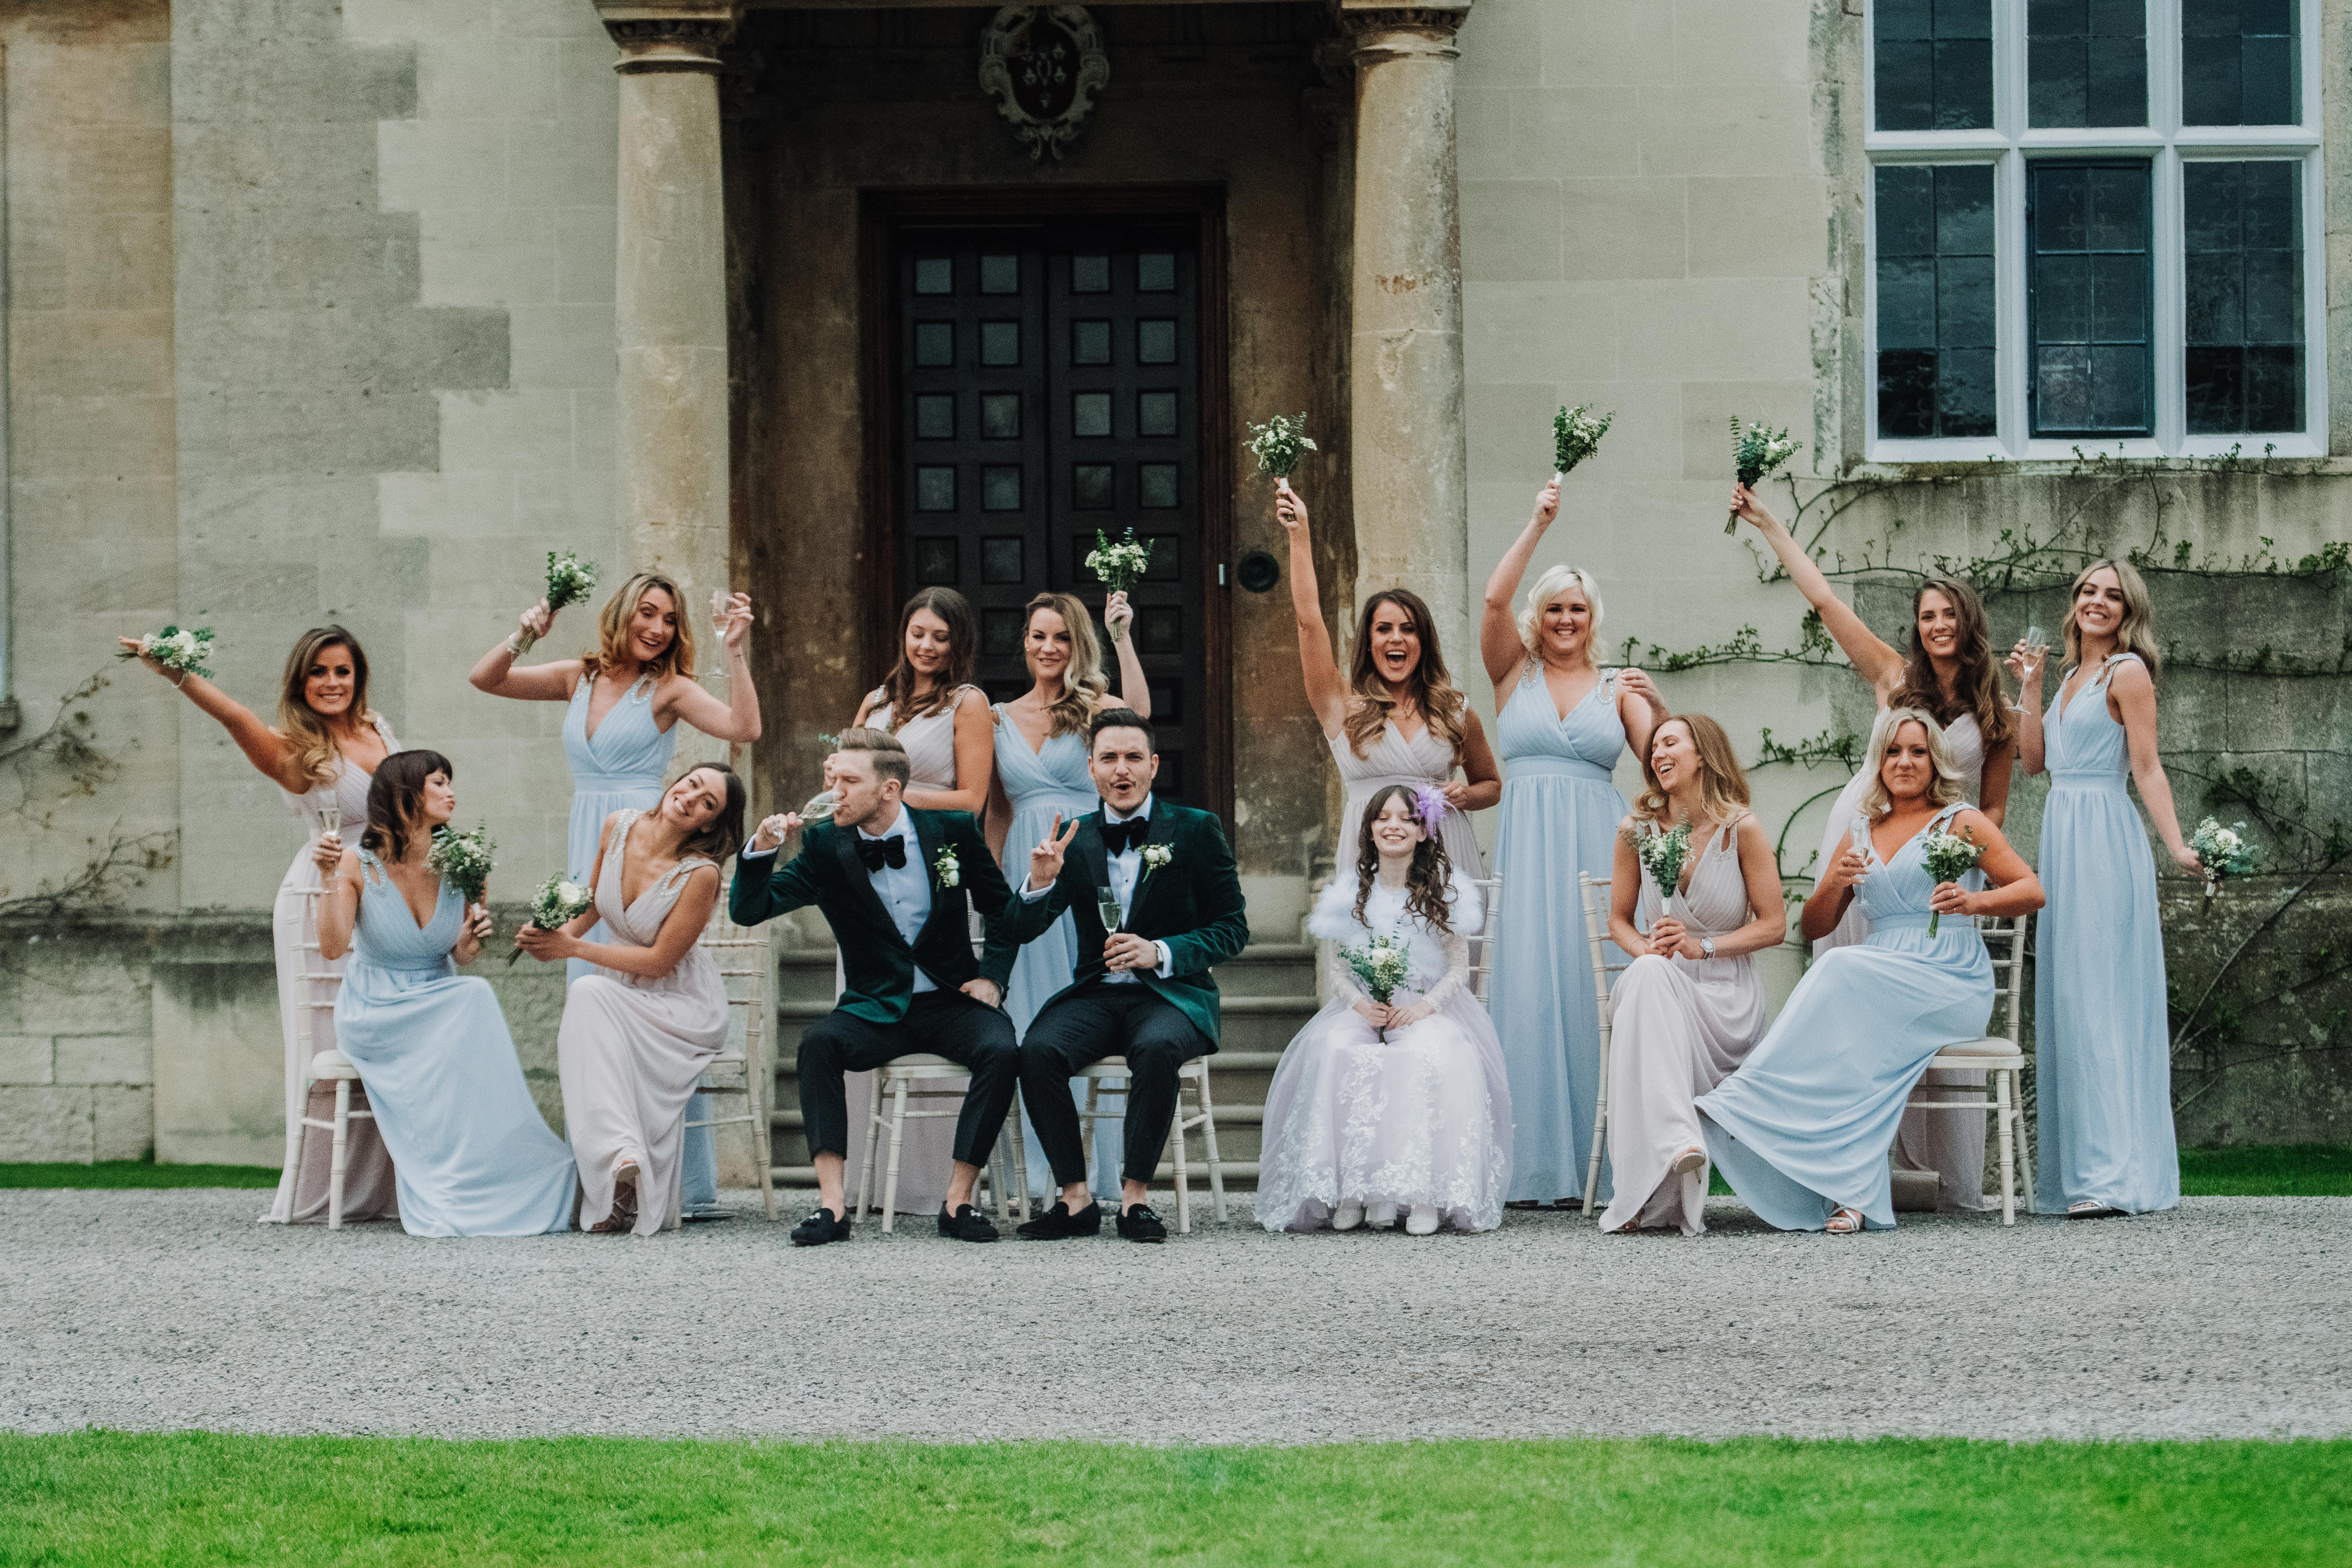 Gay wedding party with 13 bridesmaids having fun posing in front of luxury wedding venue at champagne reception in cotswolds